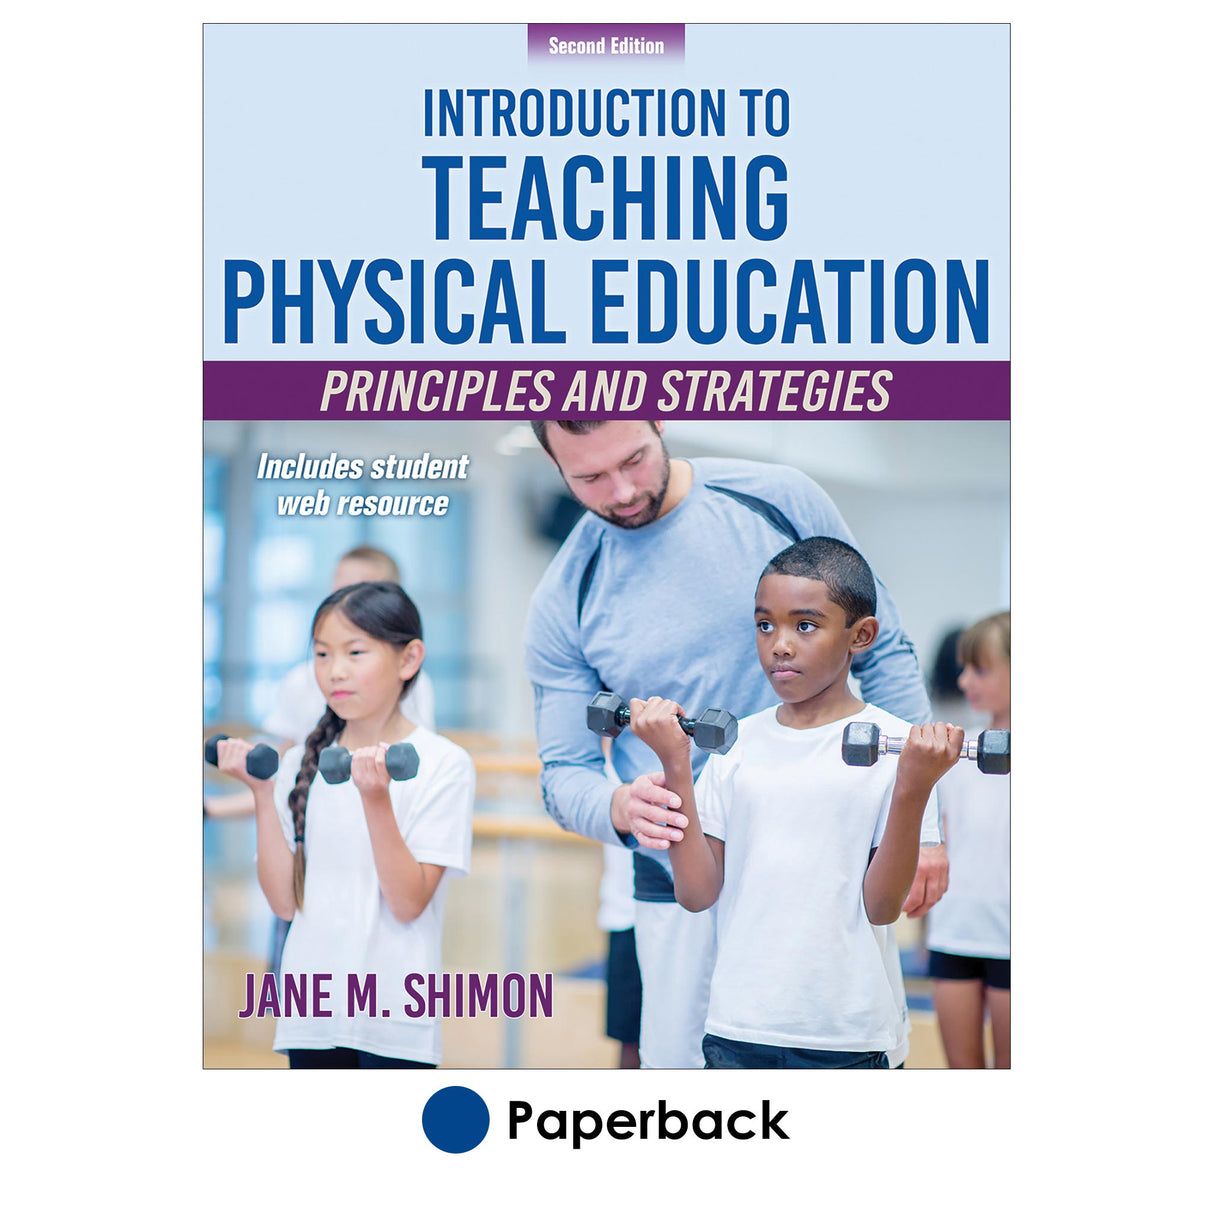 Introduction to Teaching Physical Education 2nd Edition With Web Resource